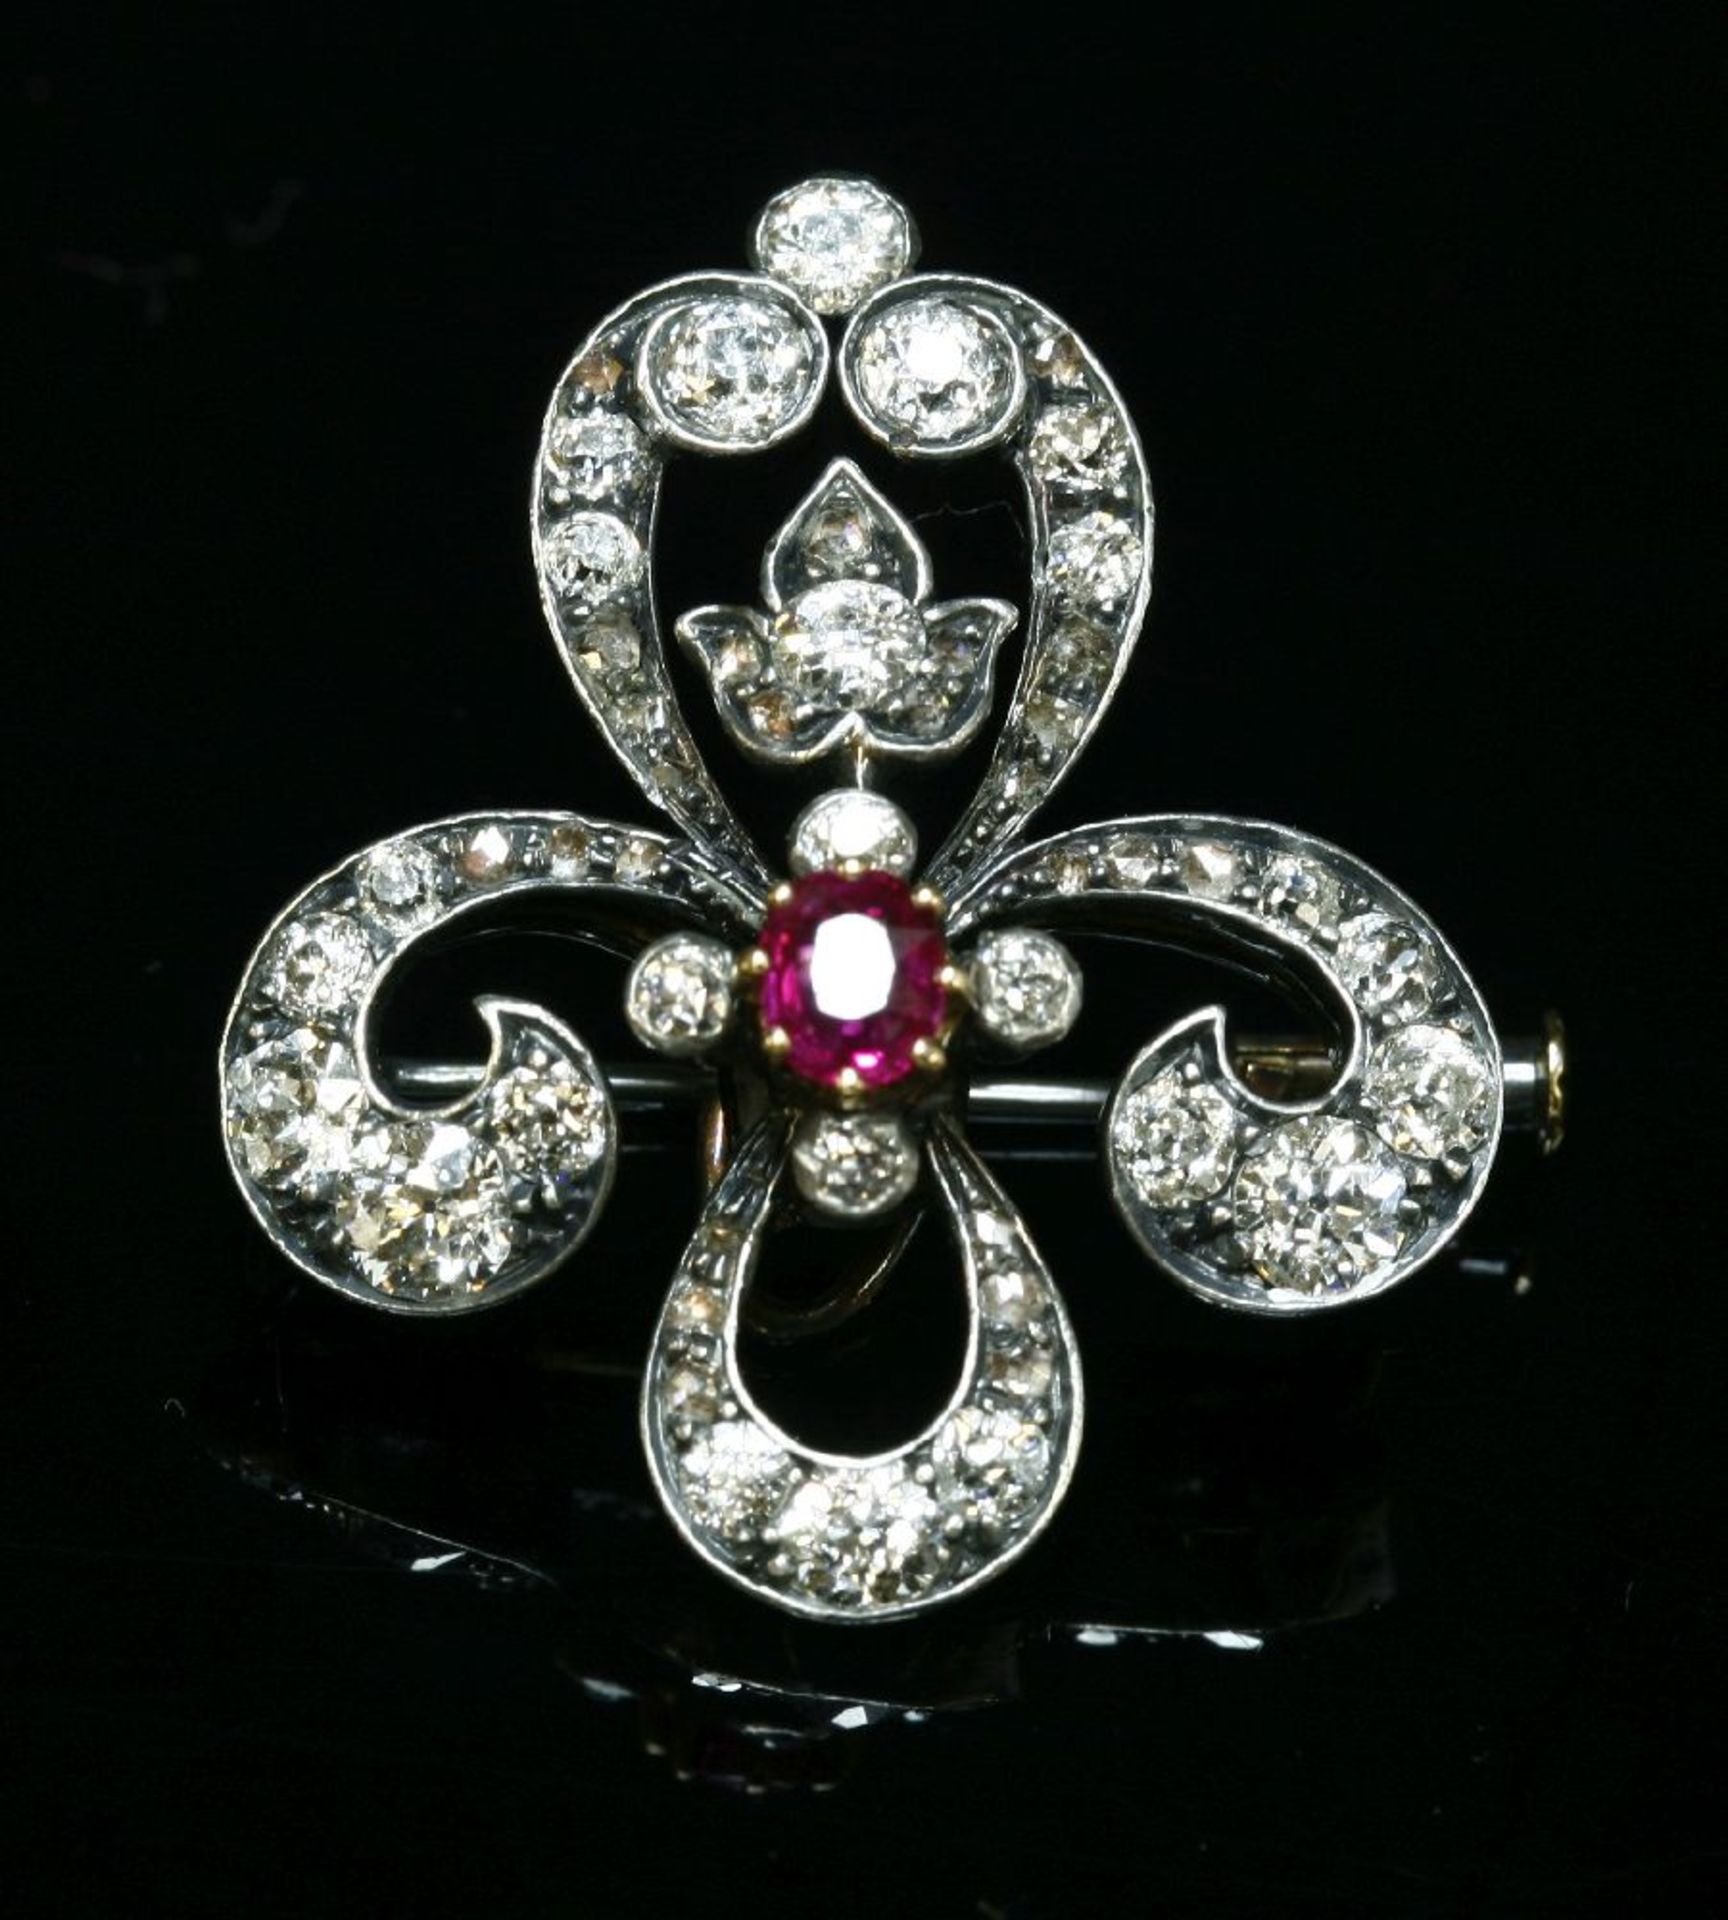 A Continental ruby and diamond fleur-de-lys brooch, c.1890,with an oval Swiss cut ruby, claw set